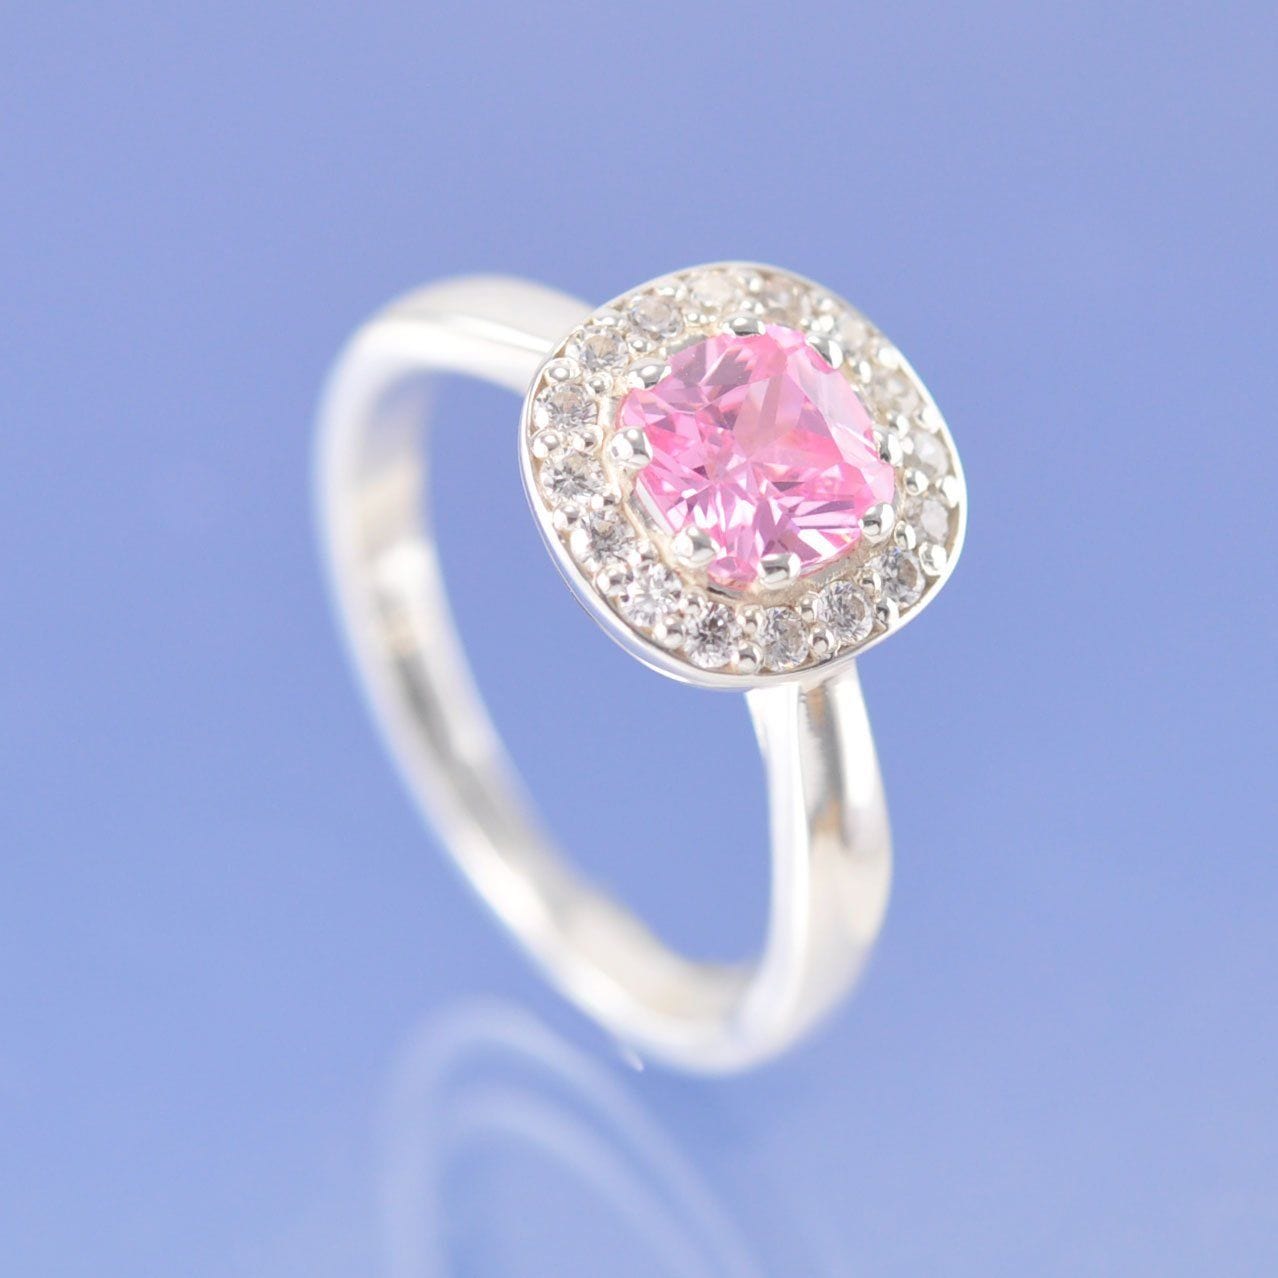 Cushion Halo Sparkling Cremation Ash Ring by Chris Parry Jewellery